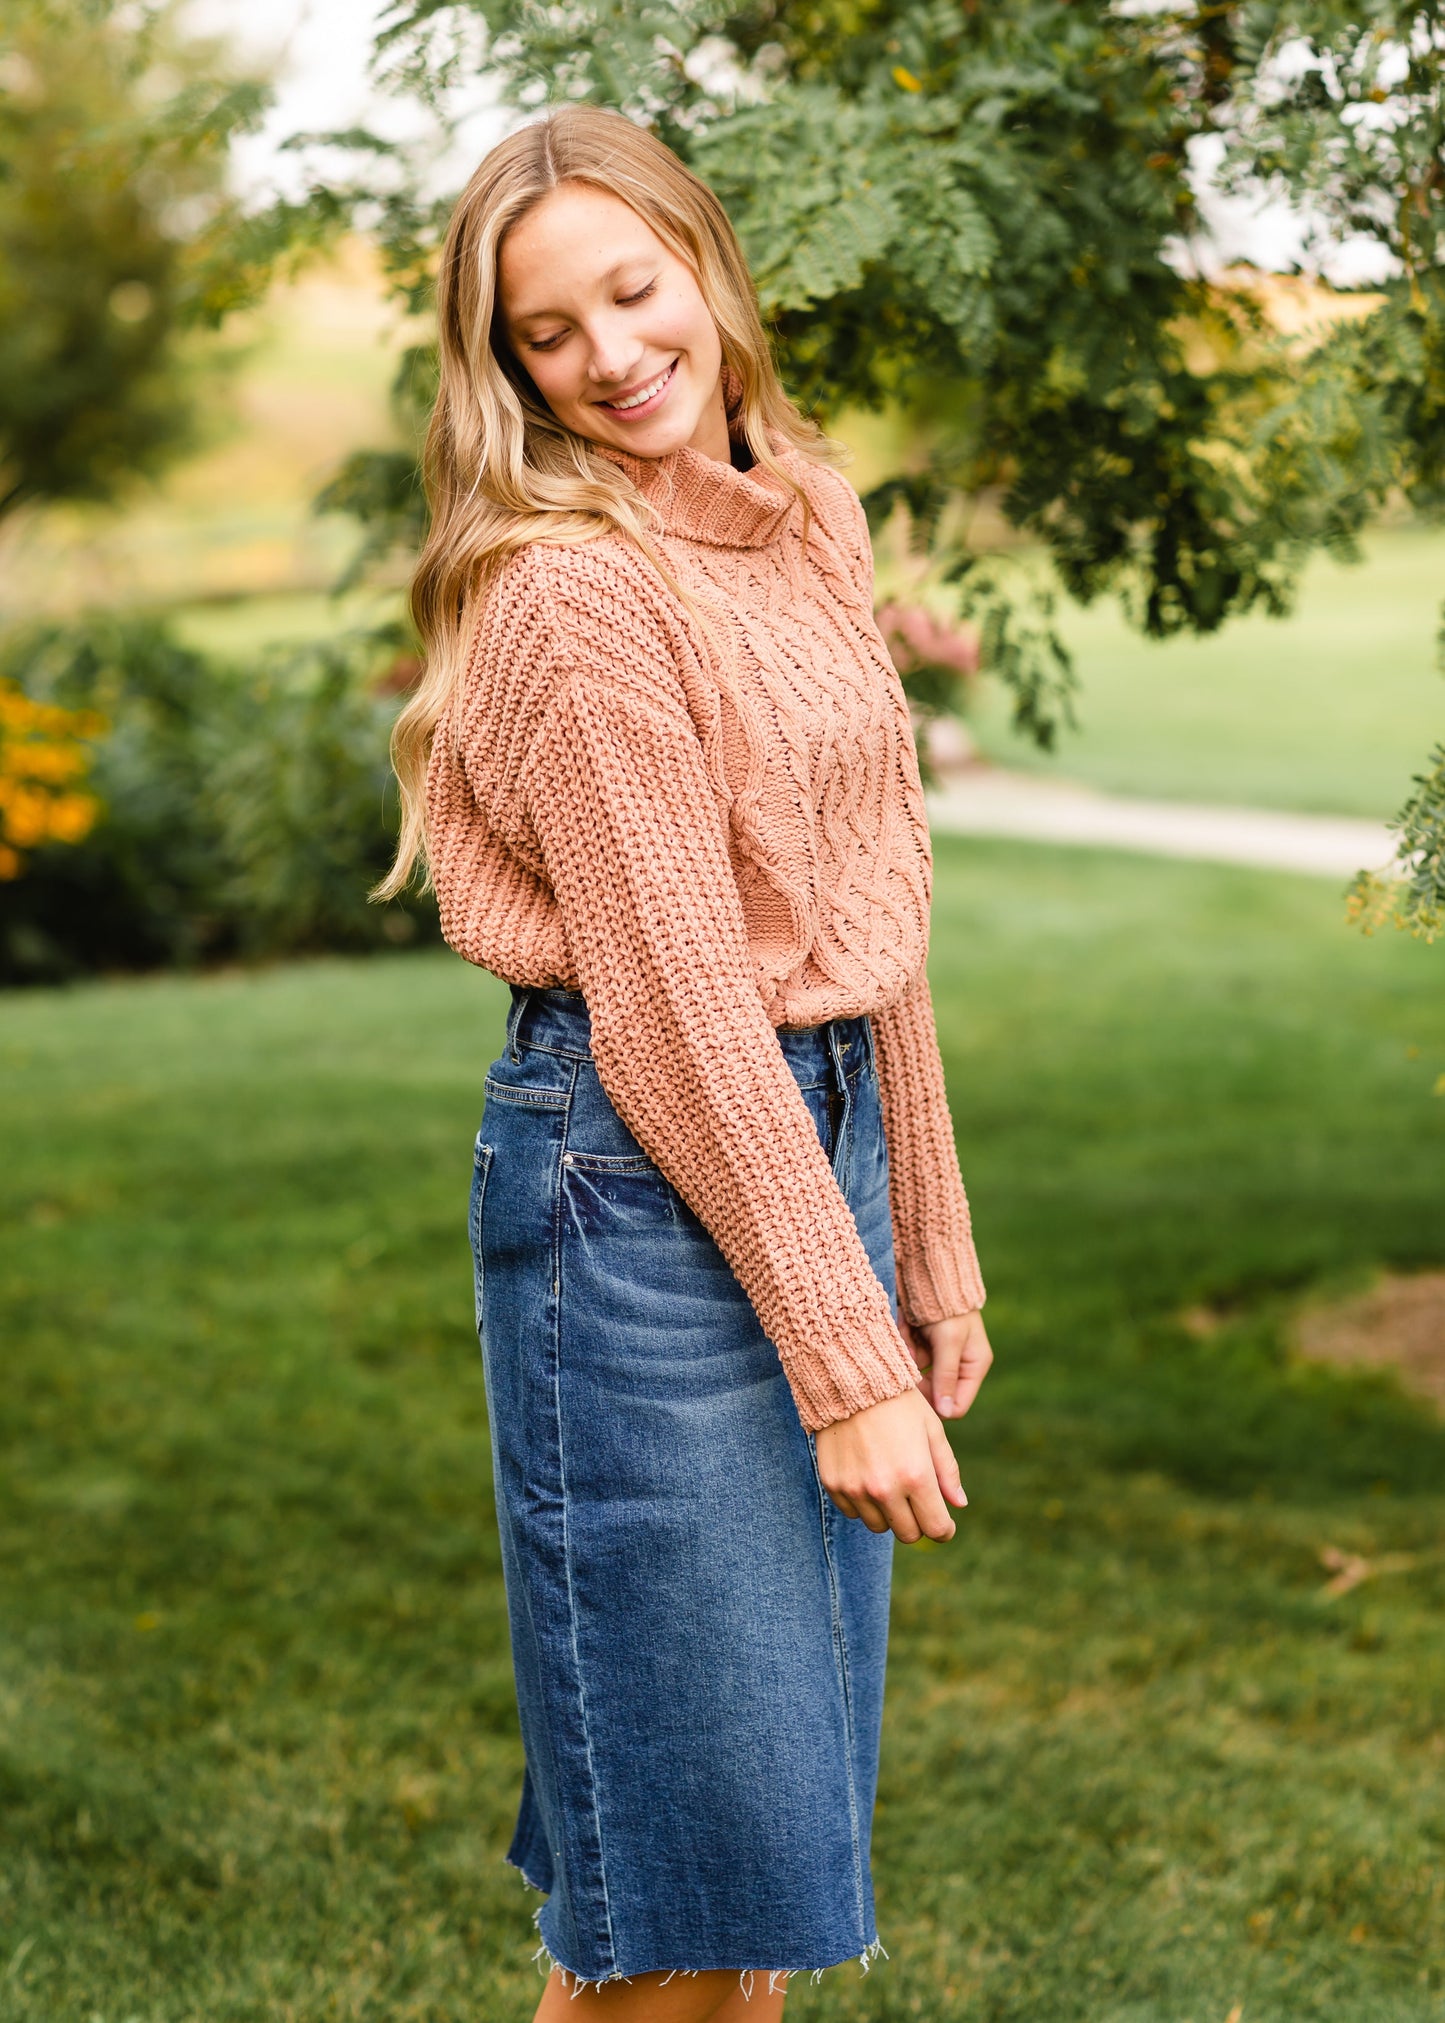 Clay Chunky Knit Turtleneck Sweater - FINAL SALE Tops